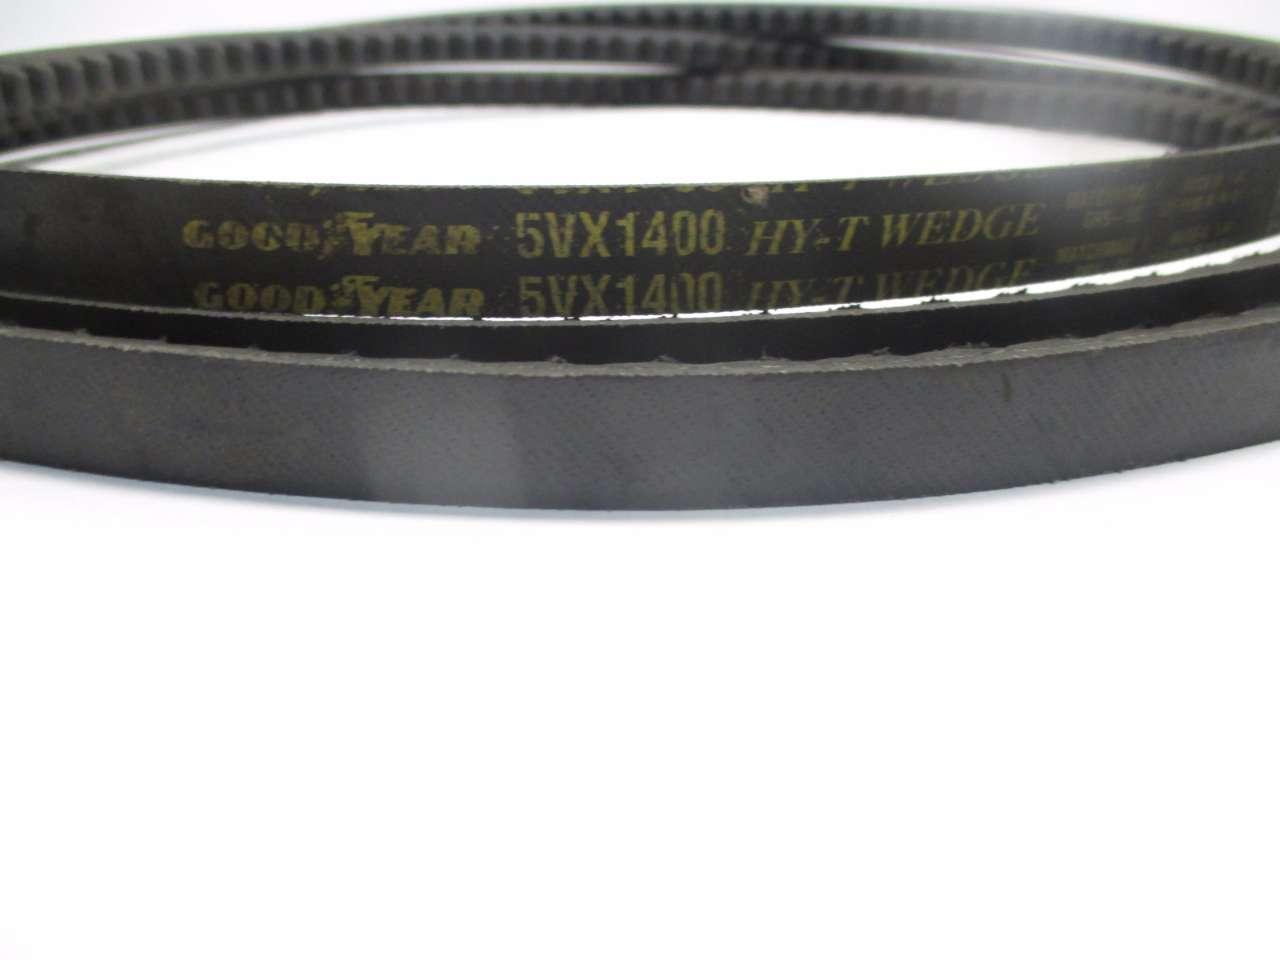 Goodyear 5VX1400 Hy-t Wedge Cogged 140x5/8in V-belt Belt D400287 for sale online 